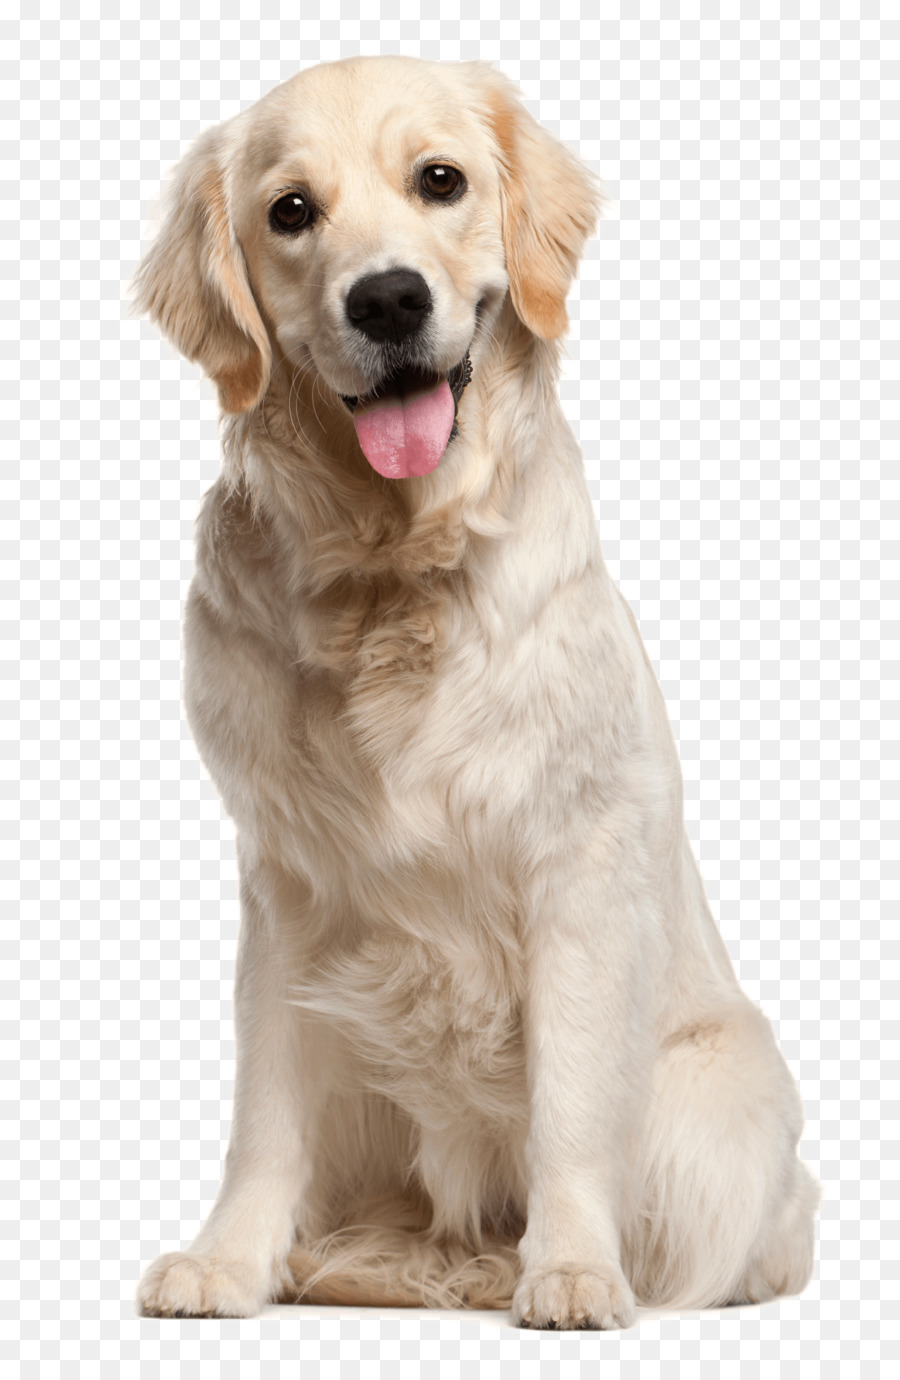 Dog grooming Puppy Cat Pet - White dog png download - 1803*2726 - Free Transparent Dog png Download.